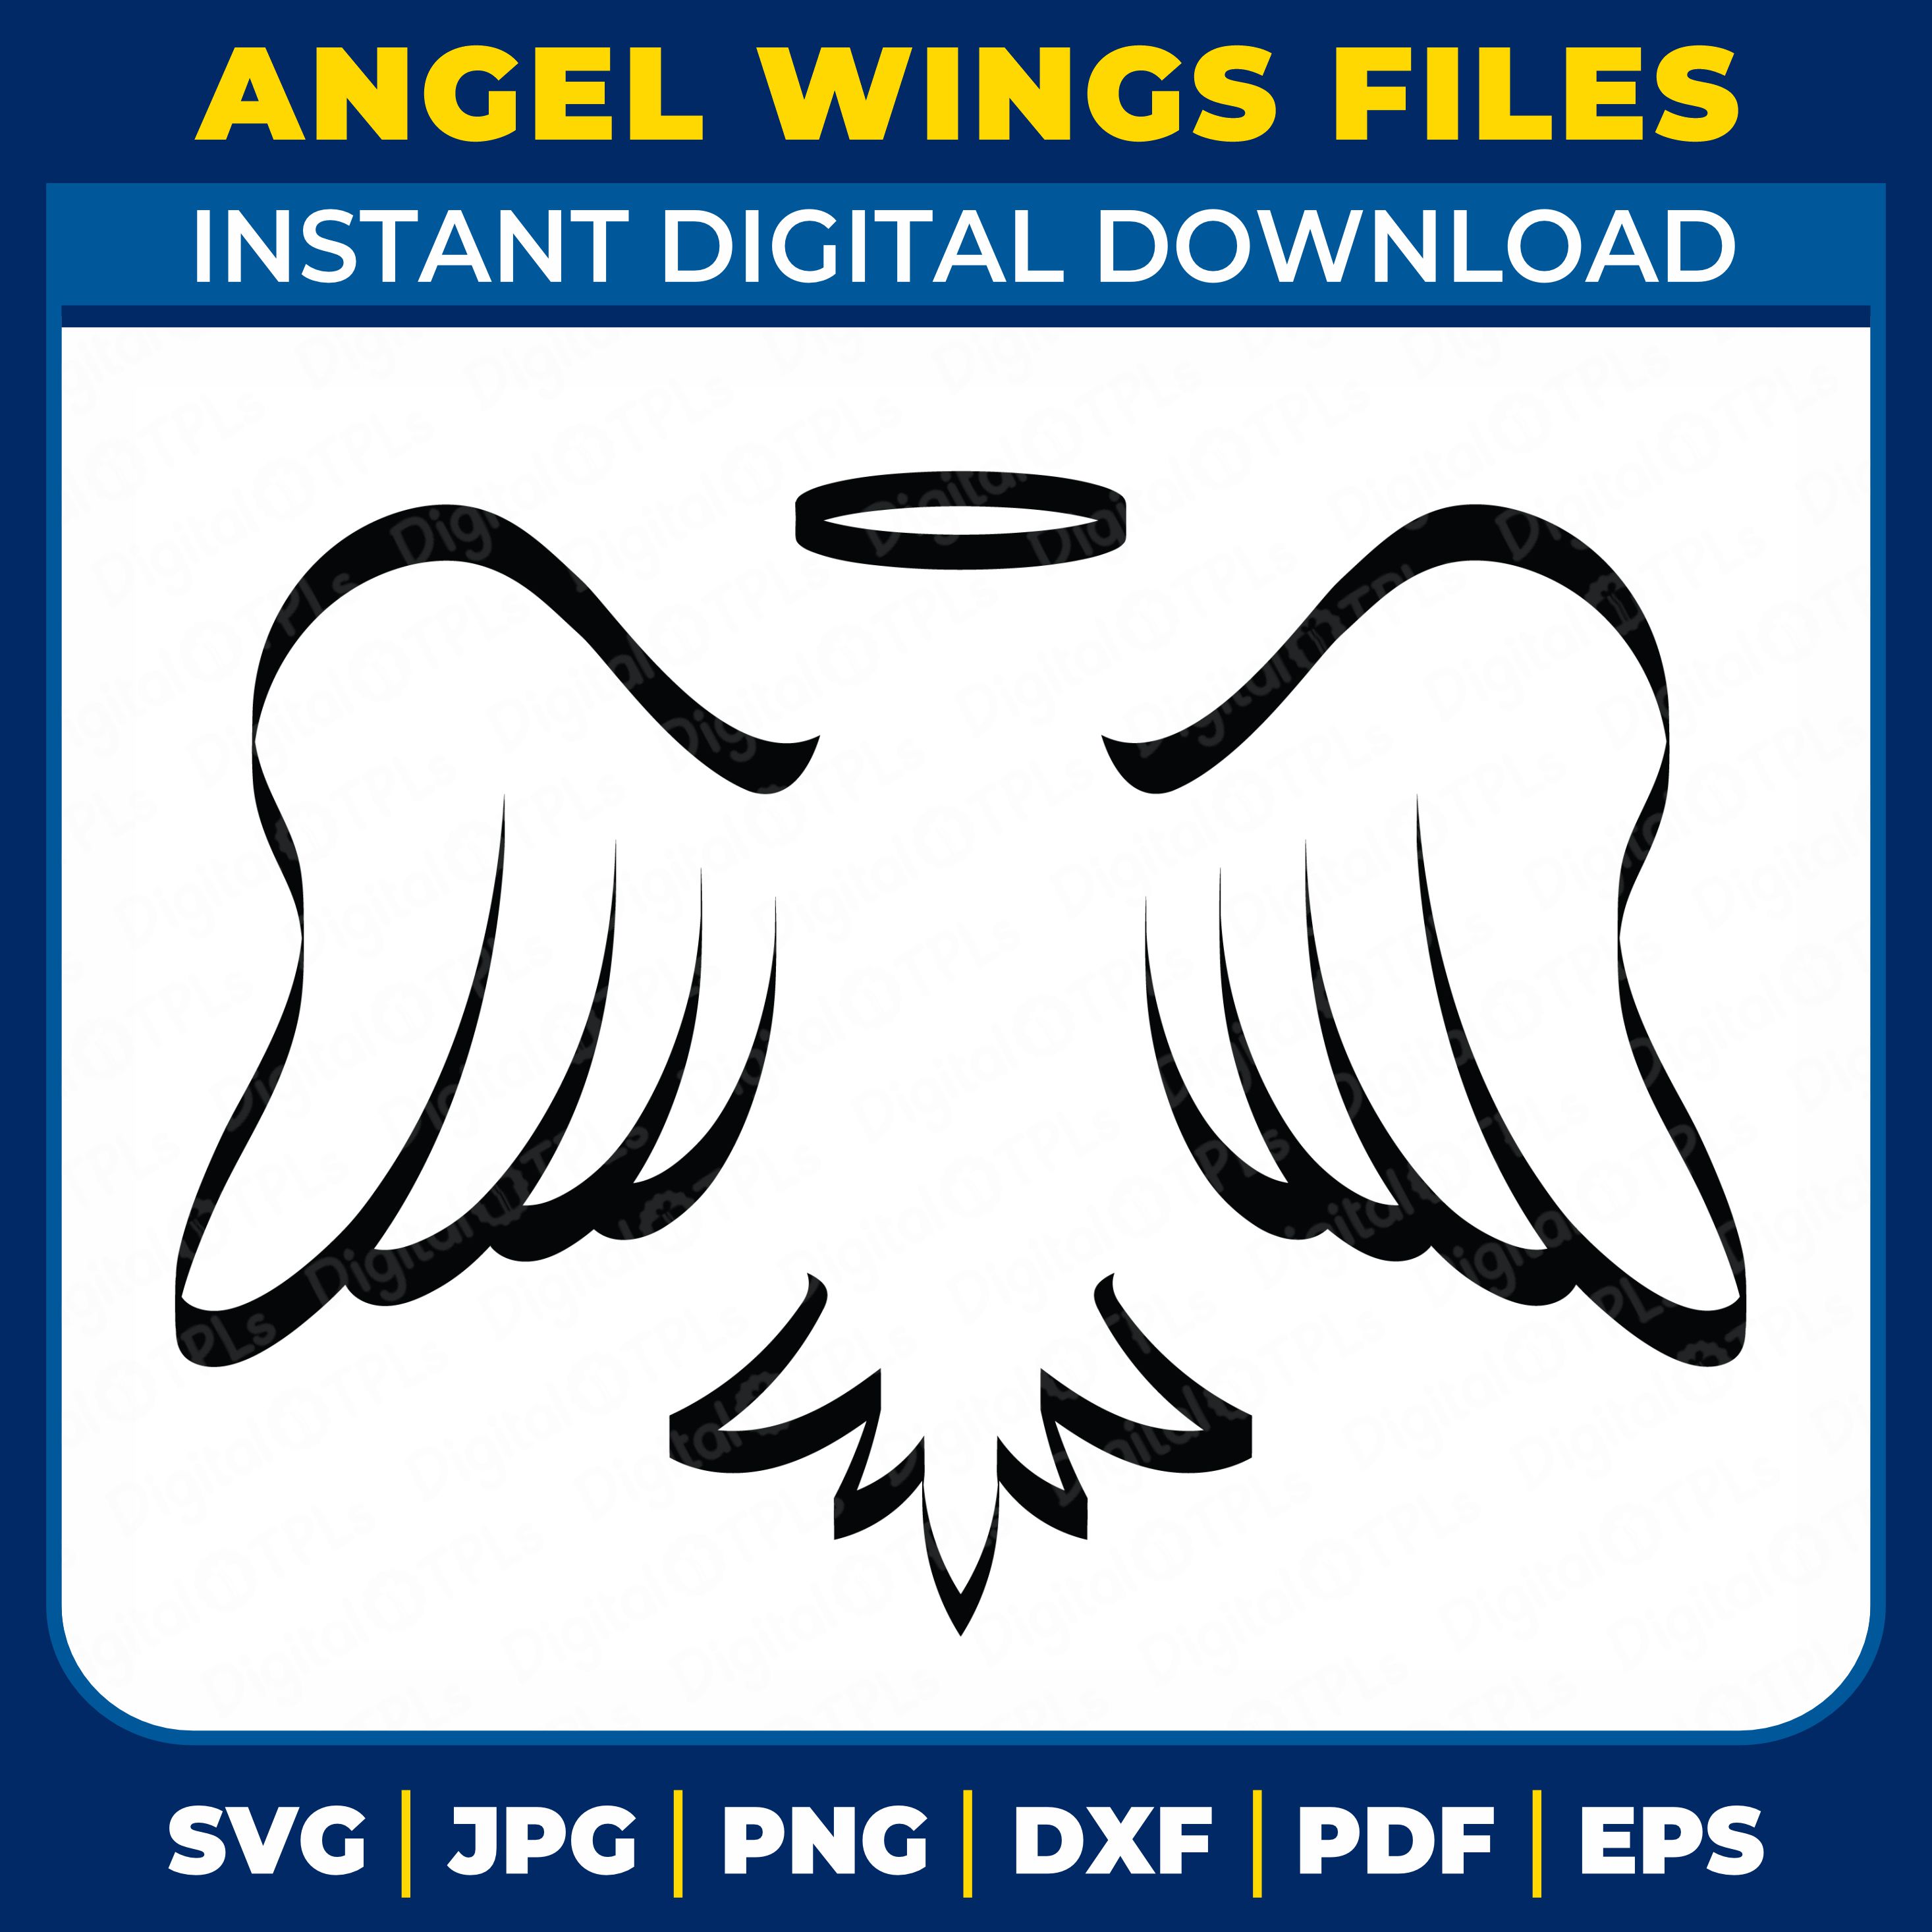 Halo and Angel Wings SVG Files cover image.